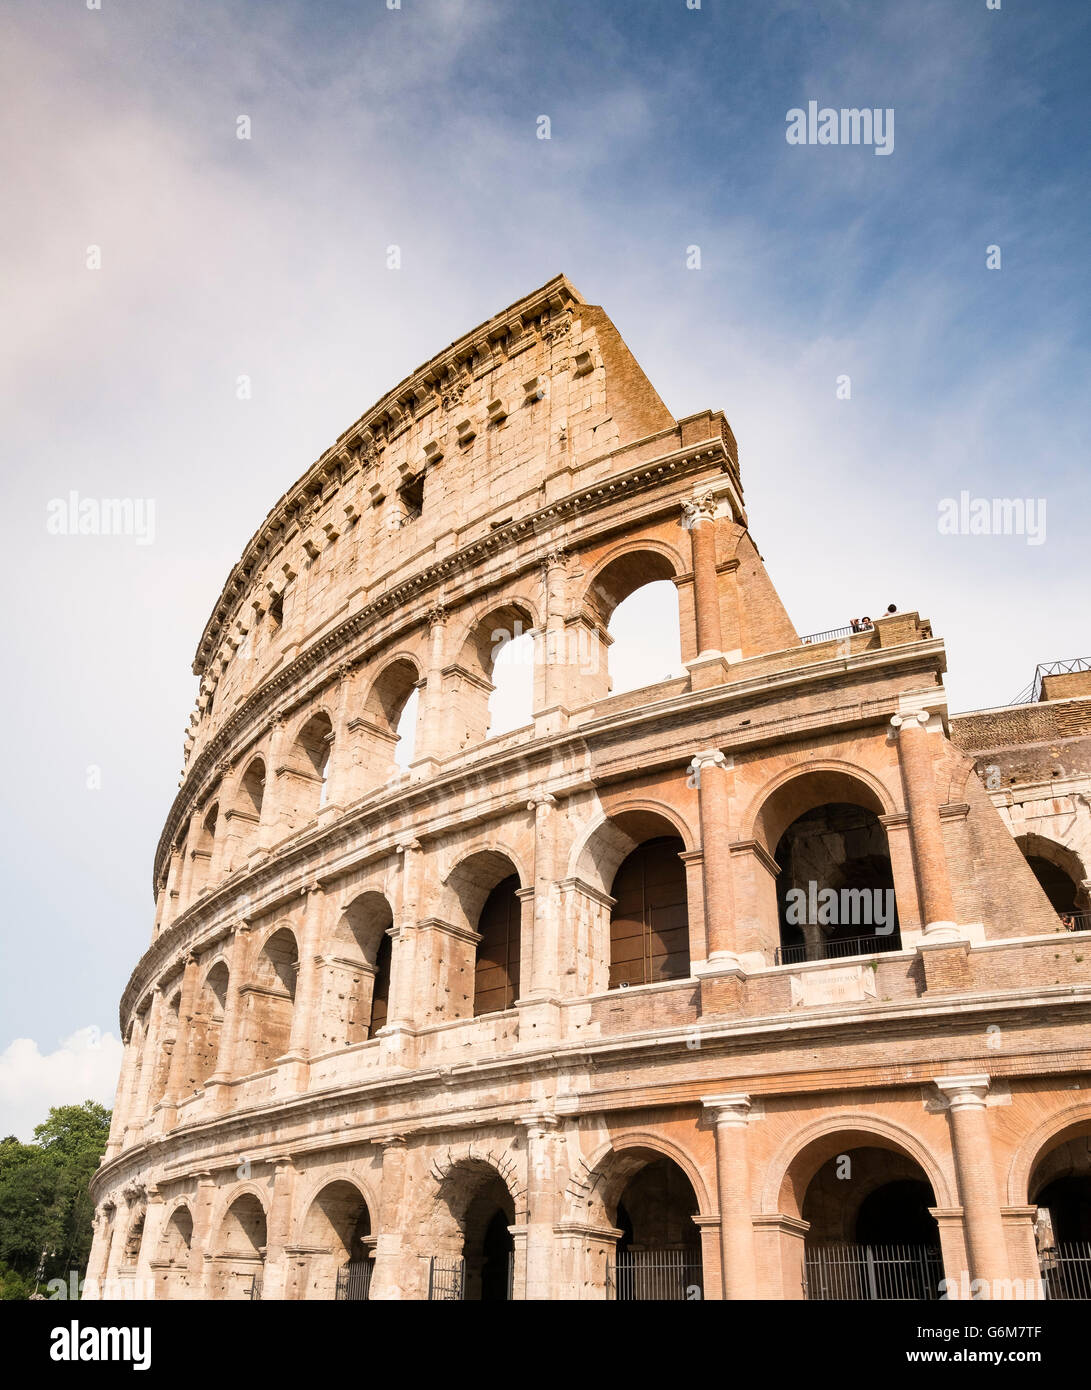 Detail of the Colosseum in Rome Italy Stock Photo